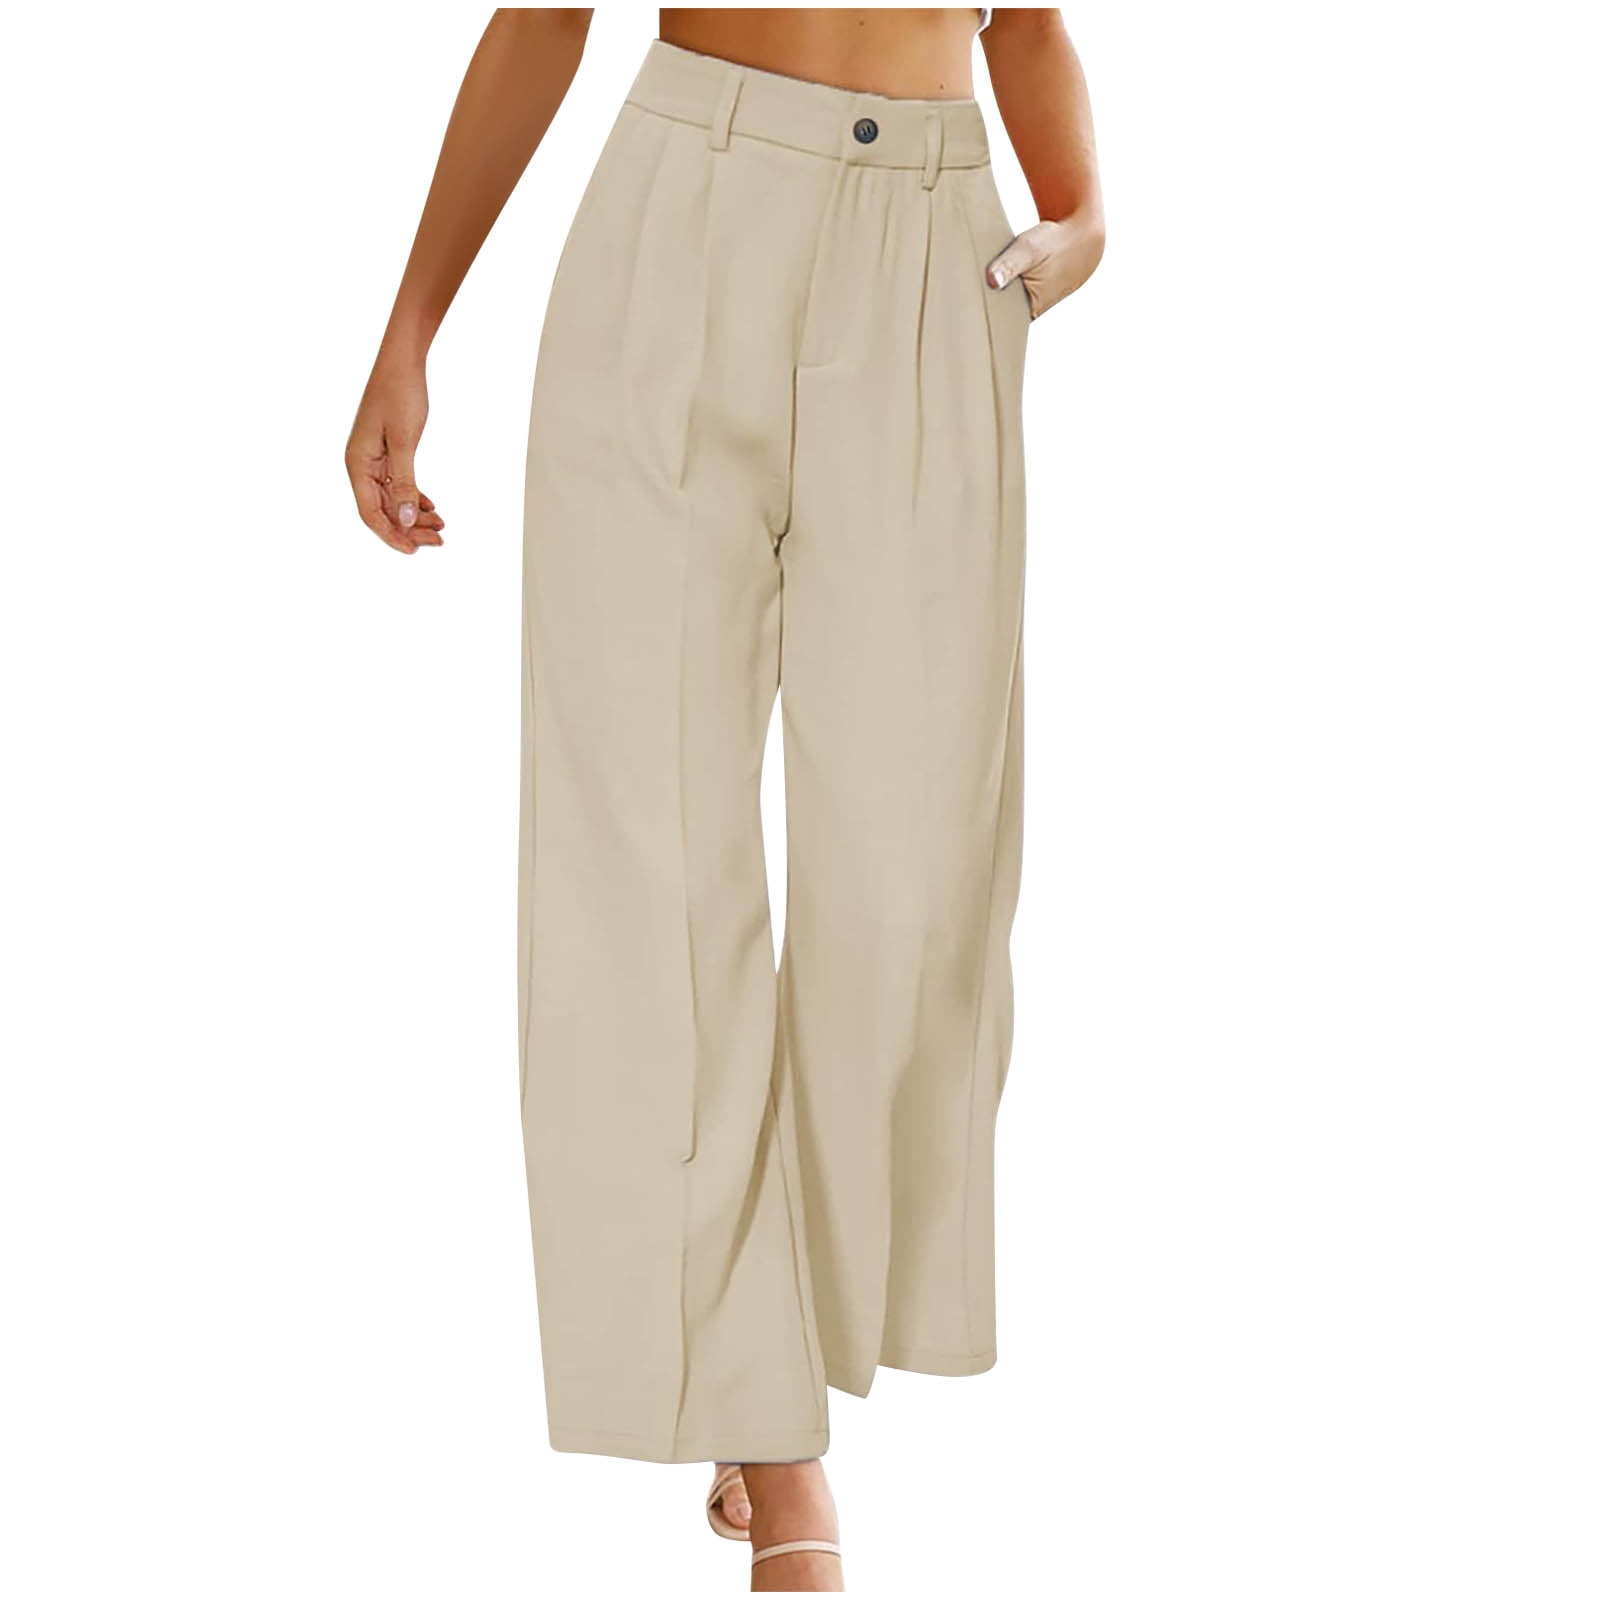 GO COLORS Women Solid Beige Viscose Mid Rise Relaxed Casual Pants - Sm :  : Fashion